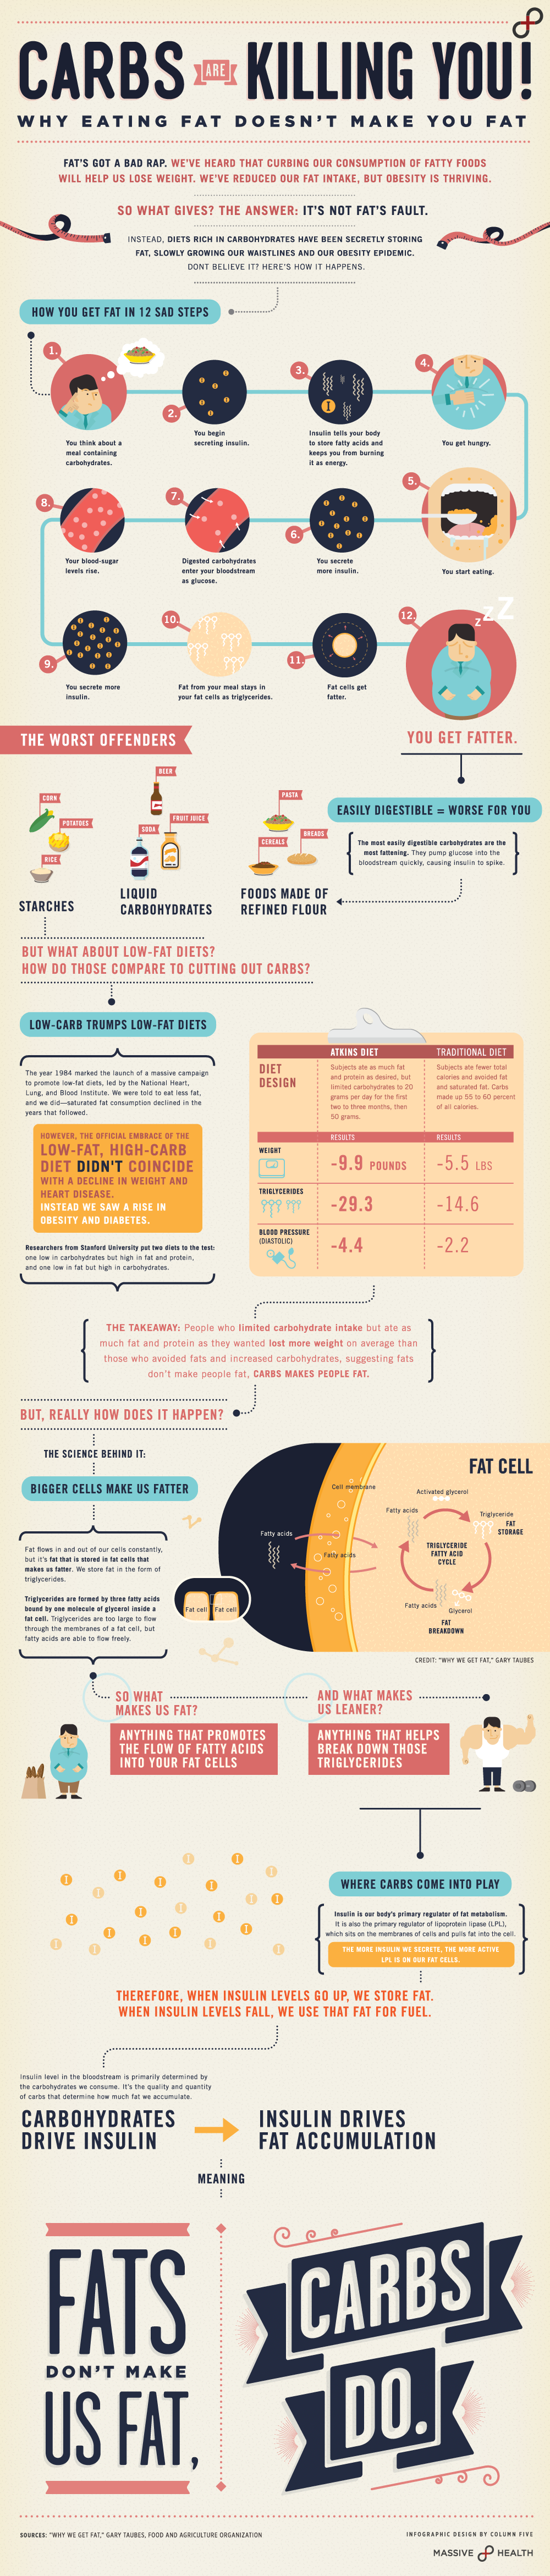 Carbs Are Killing You. Find Out Why Infographic